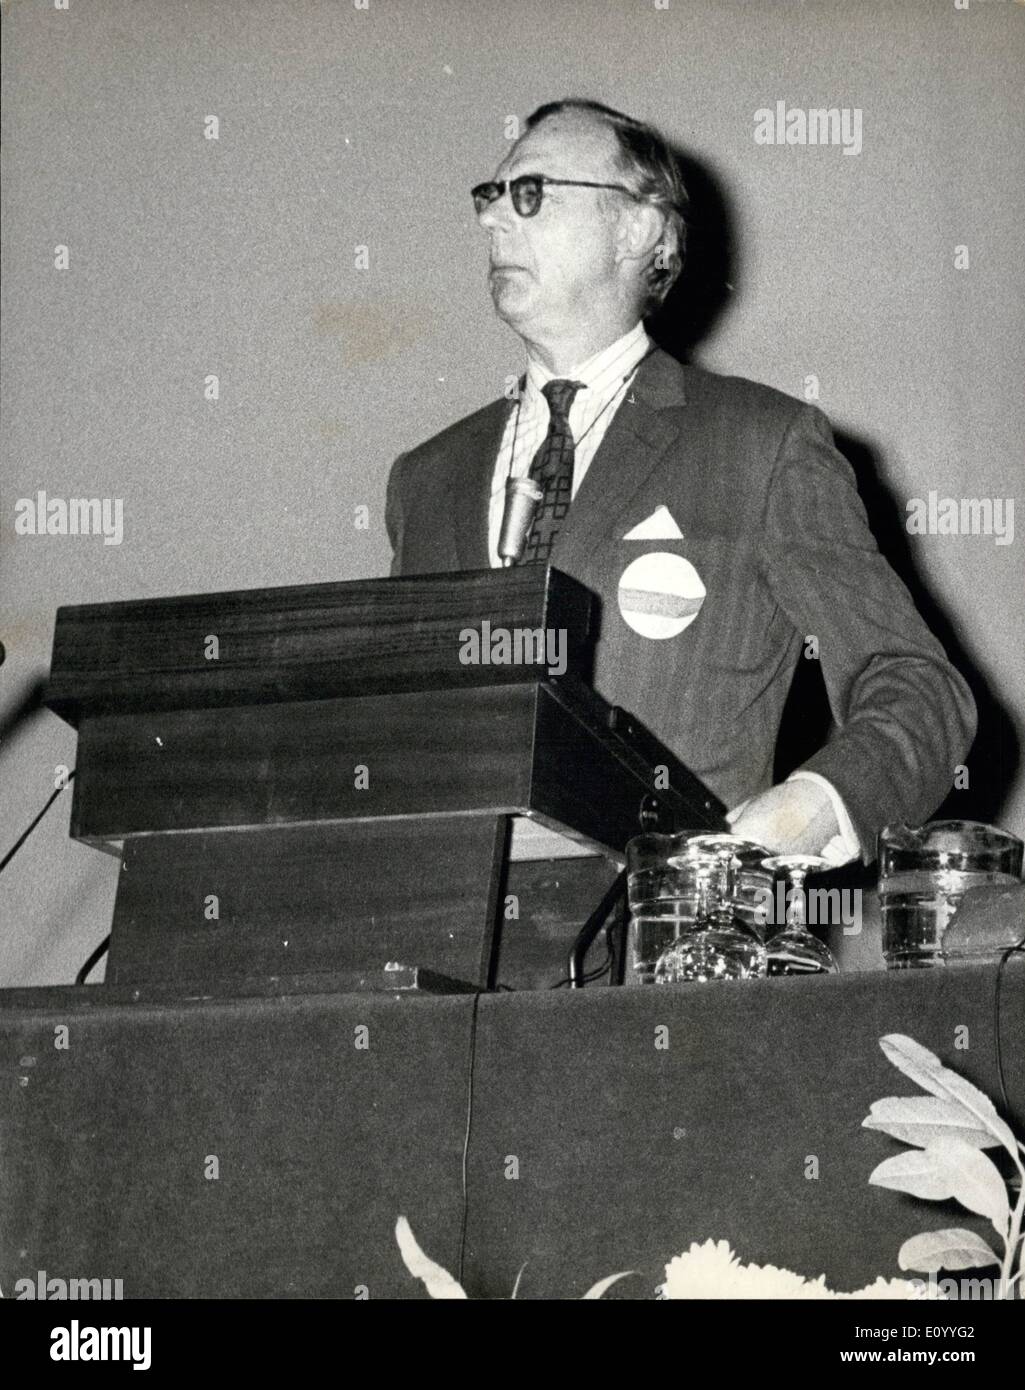 Nov. 11, 1971 - ''Youth at Work'' Conference.: A national 'Youth at Work' Conference is being held at the Royal Albert Hall today, organised by The Industrial Society. Photo shows W.O. Campbell Adamson, Director- General, Confederation of British industry, addressing the delegates at today's conference. Stock Photo